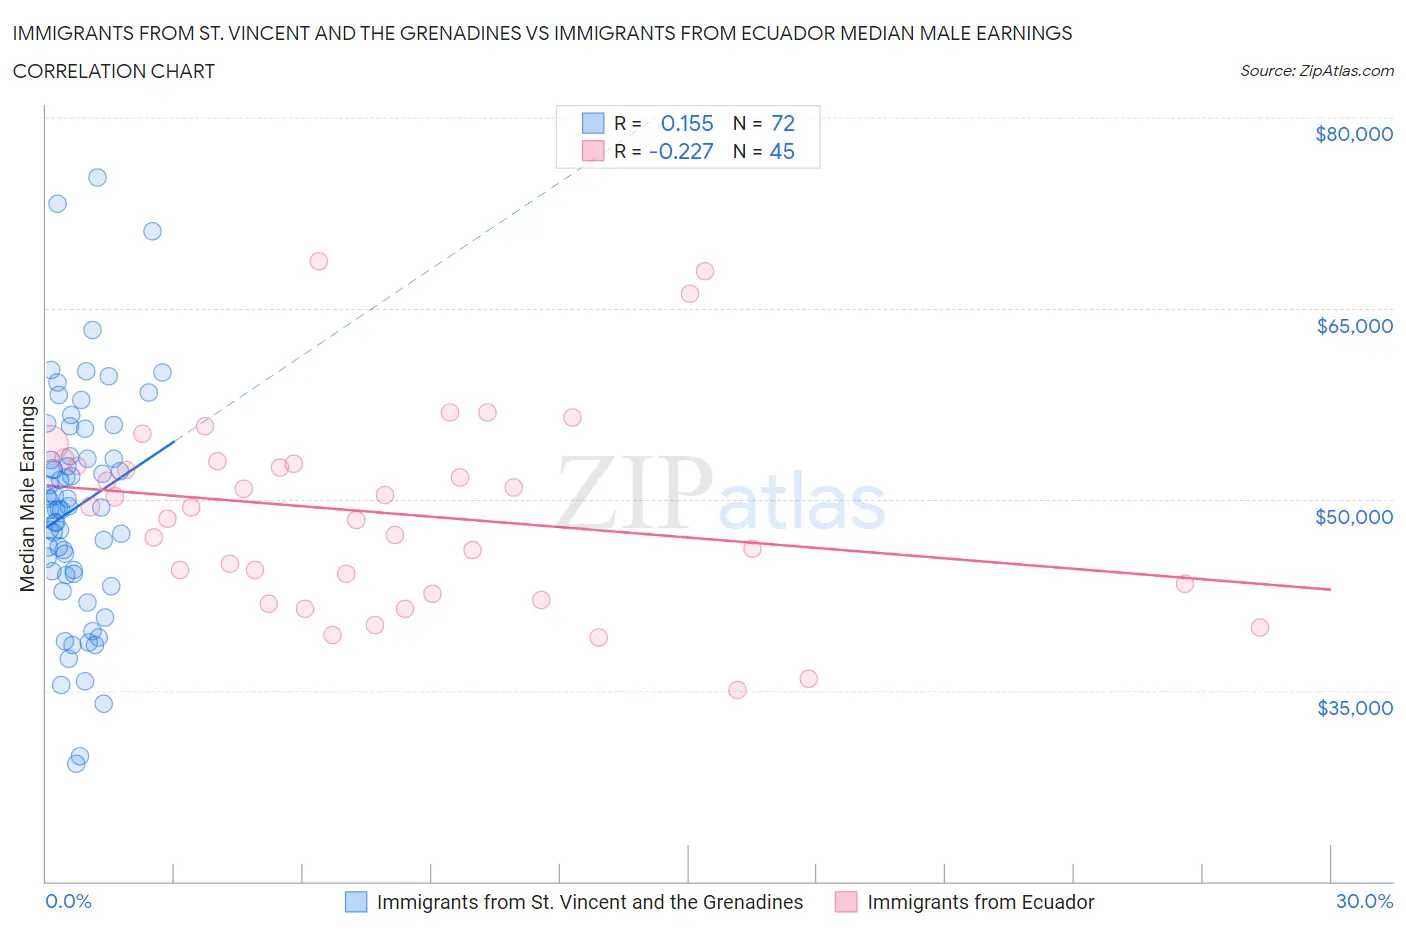 Immigrants from St. Vincent and the Grenadines vs Immigrants from Ecuador Median Male Earnings